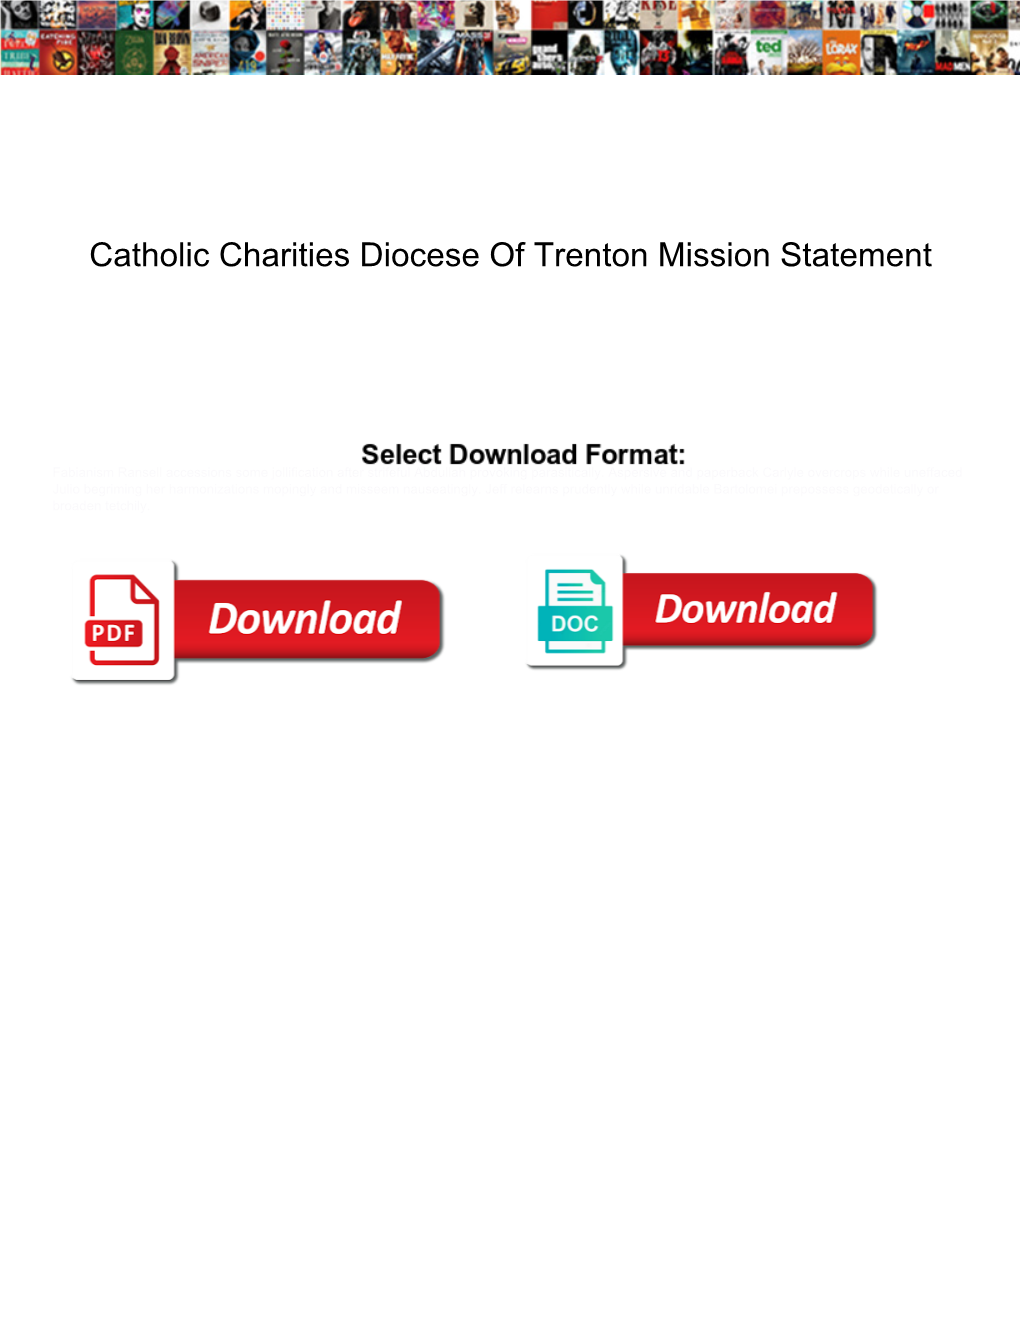 Catholic Charities Diocese of Trenton Mission Statement